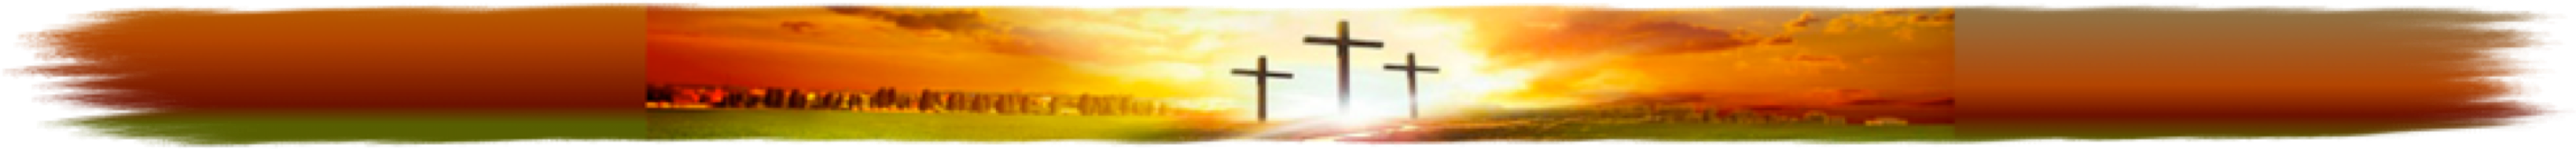 Easter Image.png__PID:49703ab0-37de-4cd7-8641-4aa7a4091c13